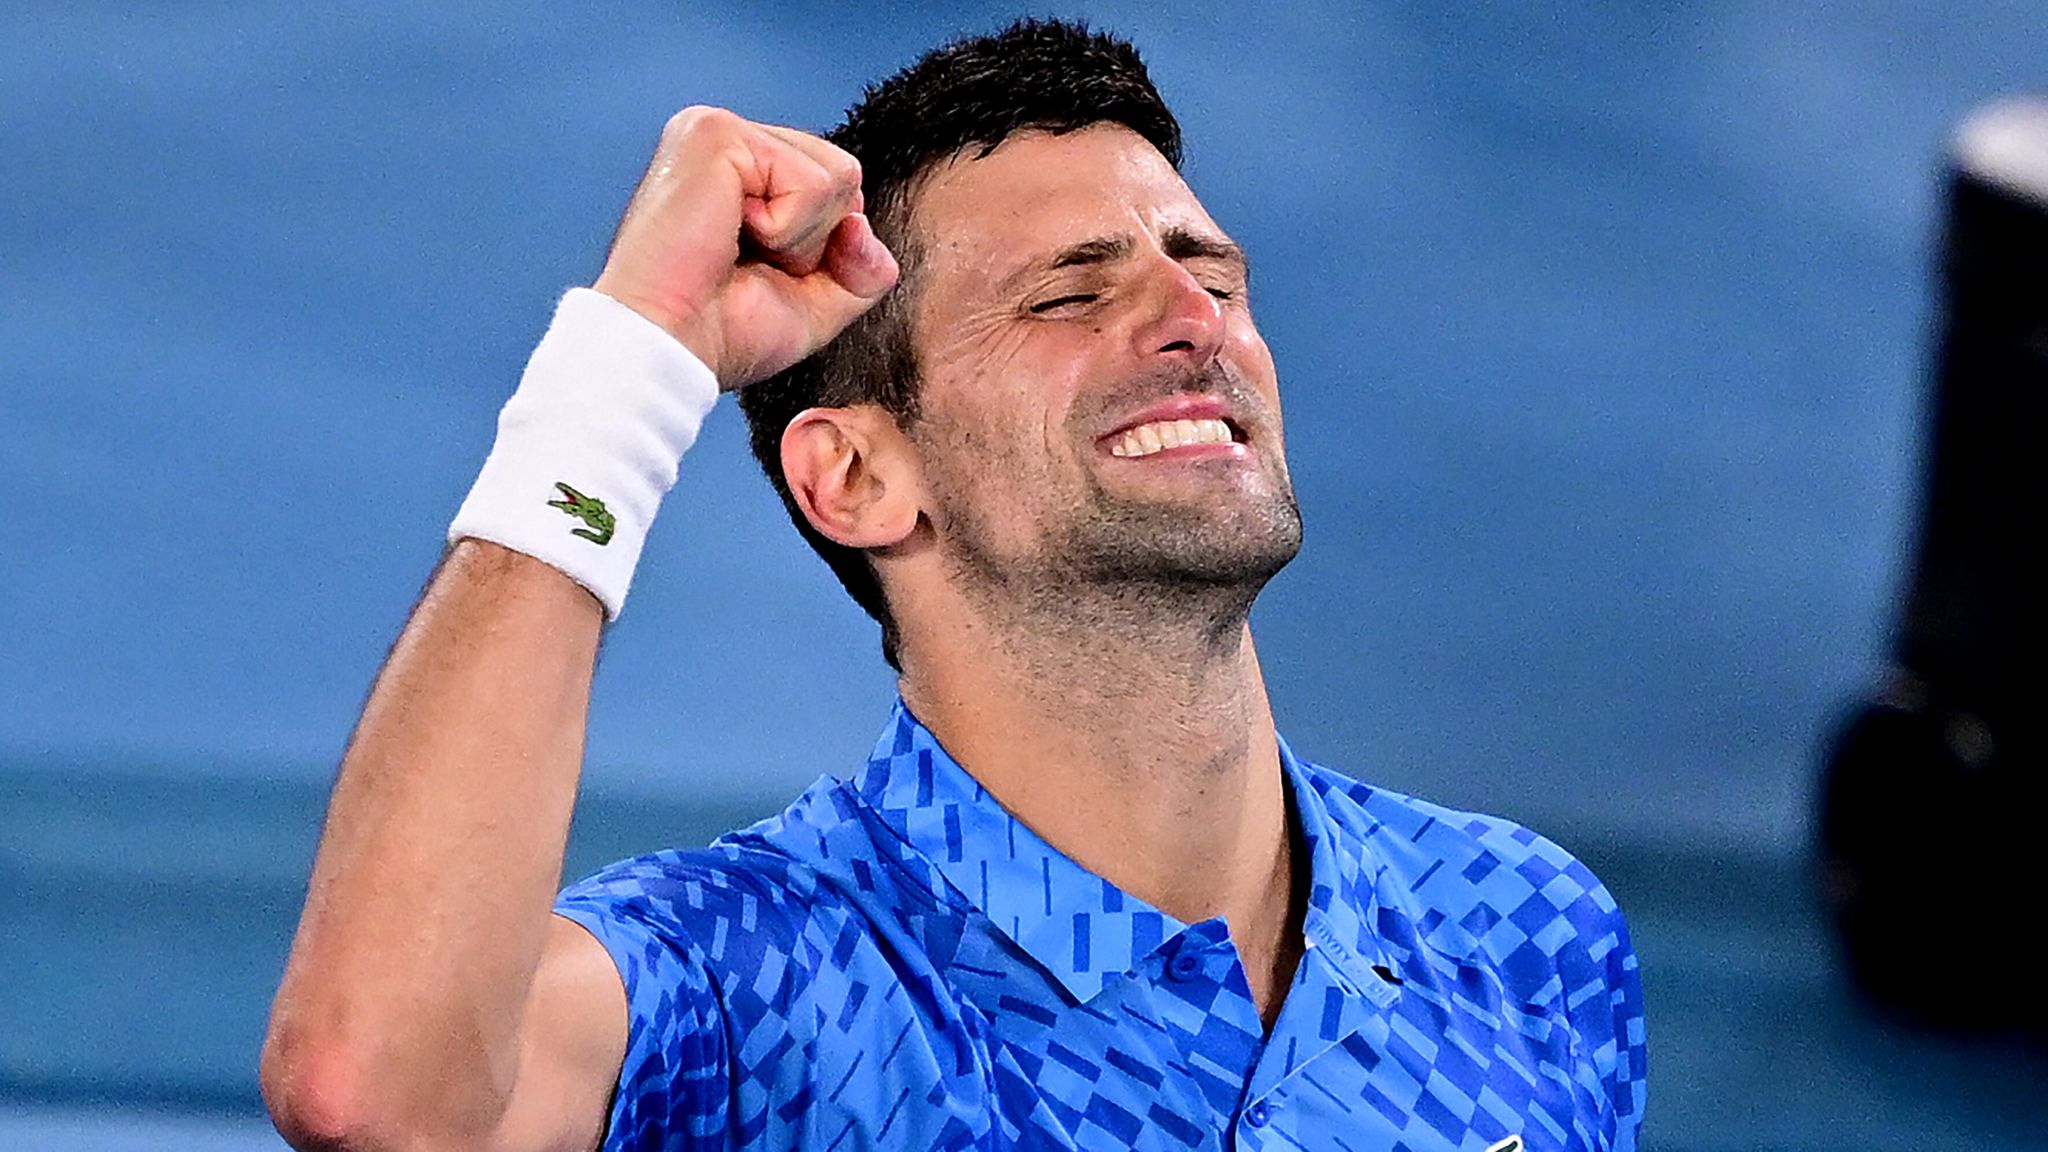 Australian Open Novak Djokovic sets up final against Stefanos Tsitsipas to stay on course for 10th title in Melbourne Tennis News Sky Sports